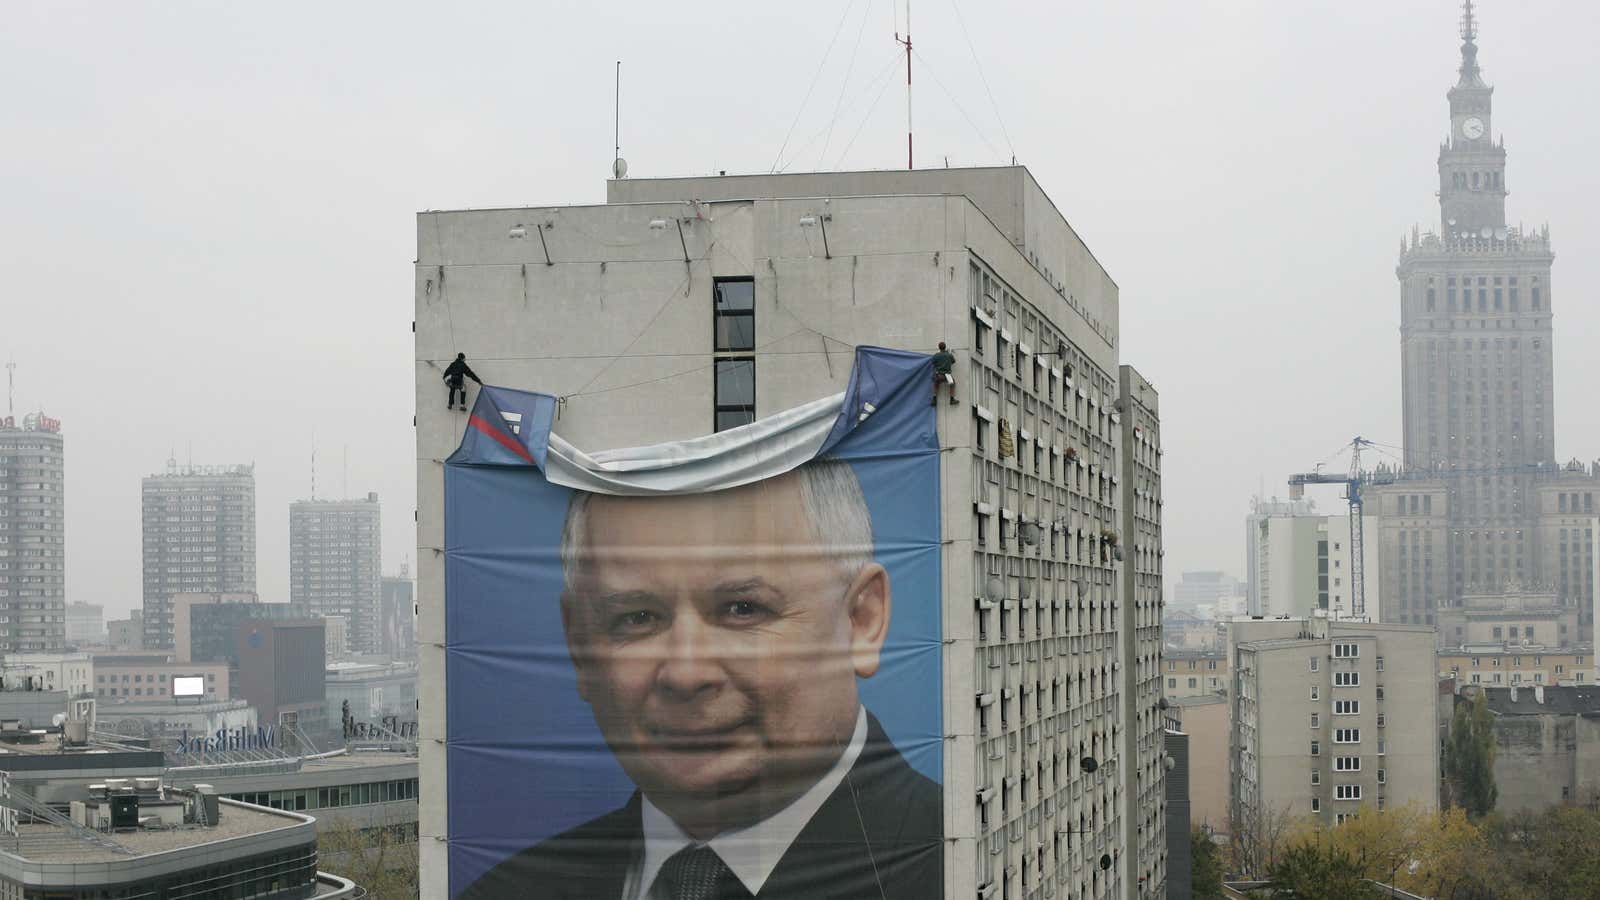 Jaroslaw Kaczynski, chairman of Poland’s Law and Justice party, is widely thought to be the mastermind behind the country’s shift to the far right.